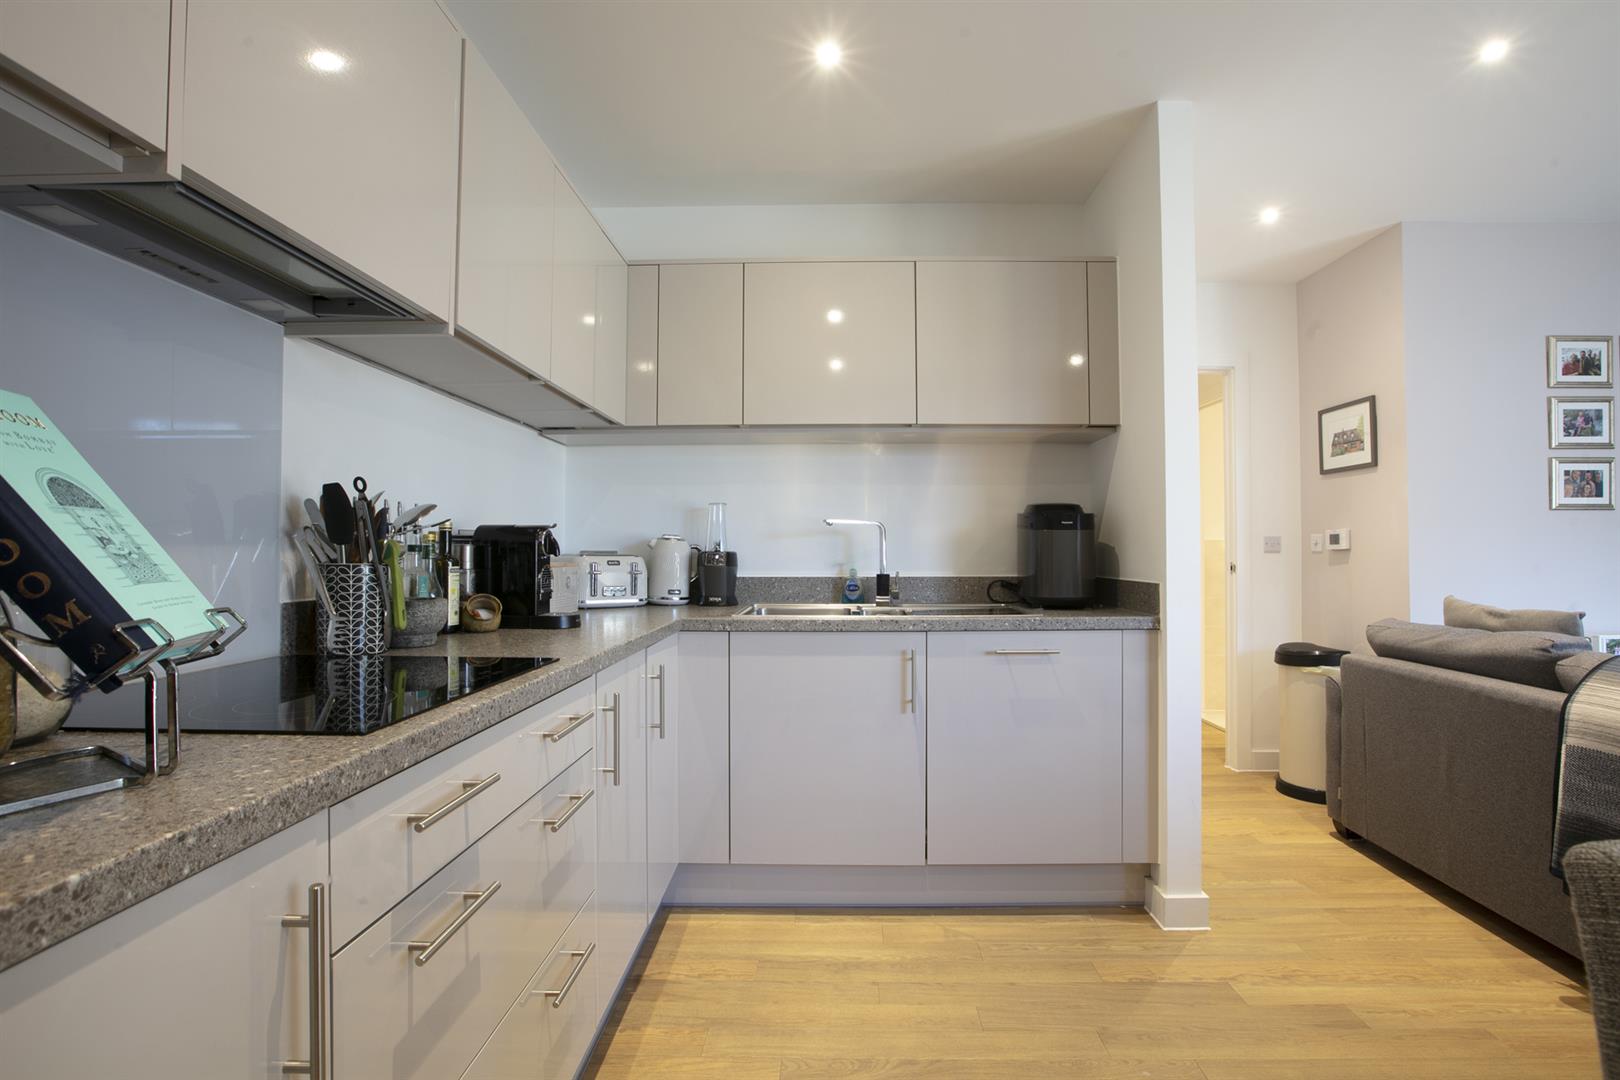 Flat - Purpose Built For Sale in Elmington Road, Camberwell, SE5 904 view9